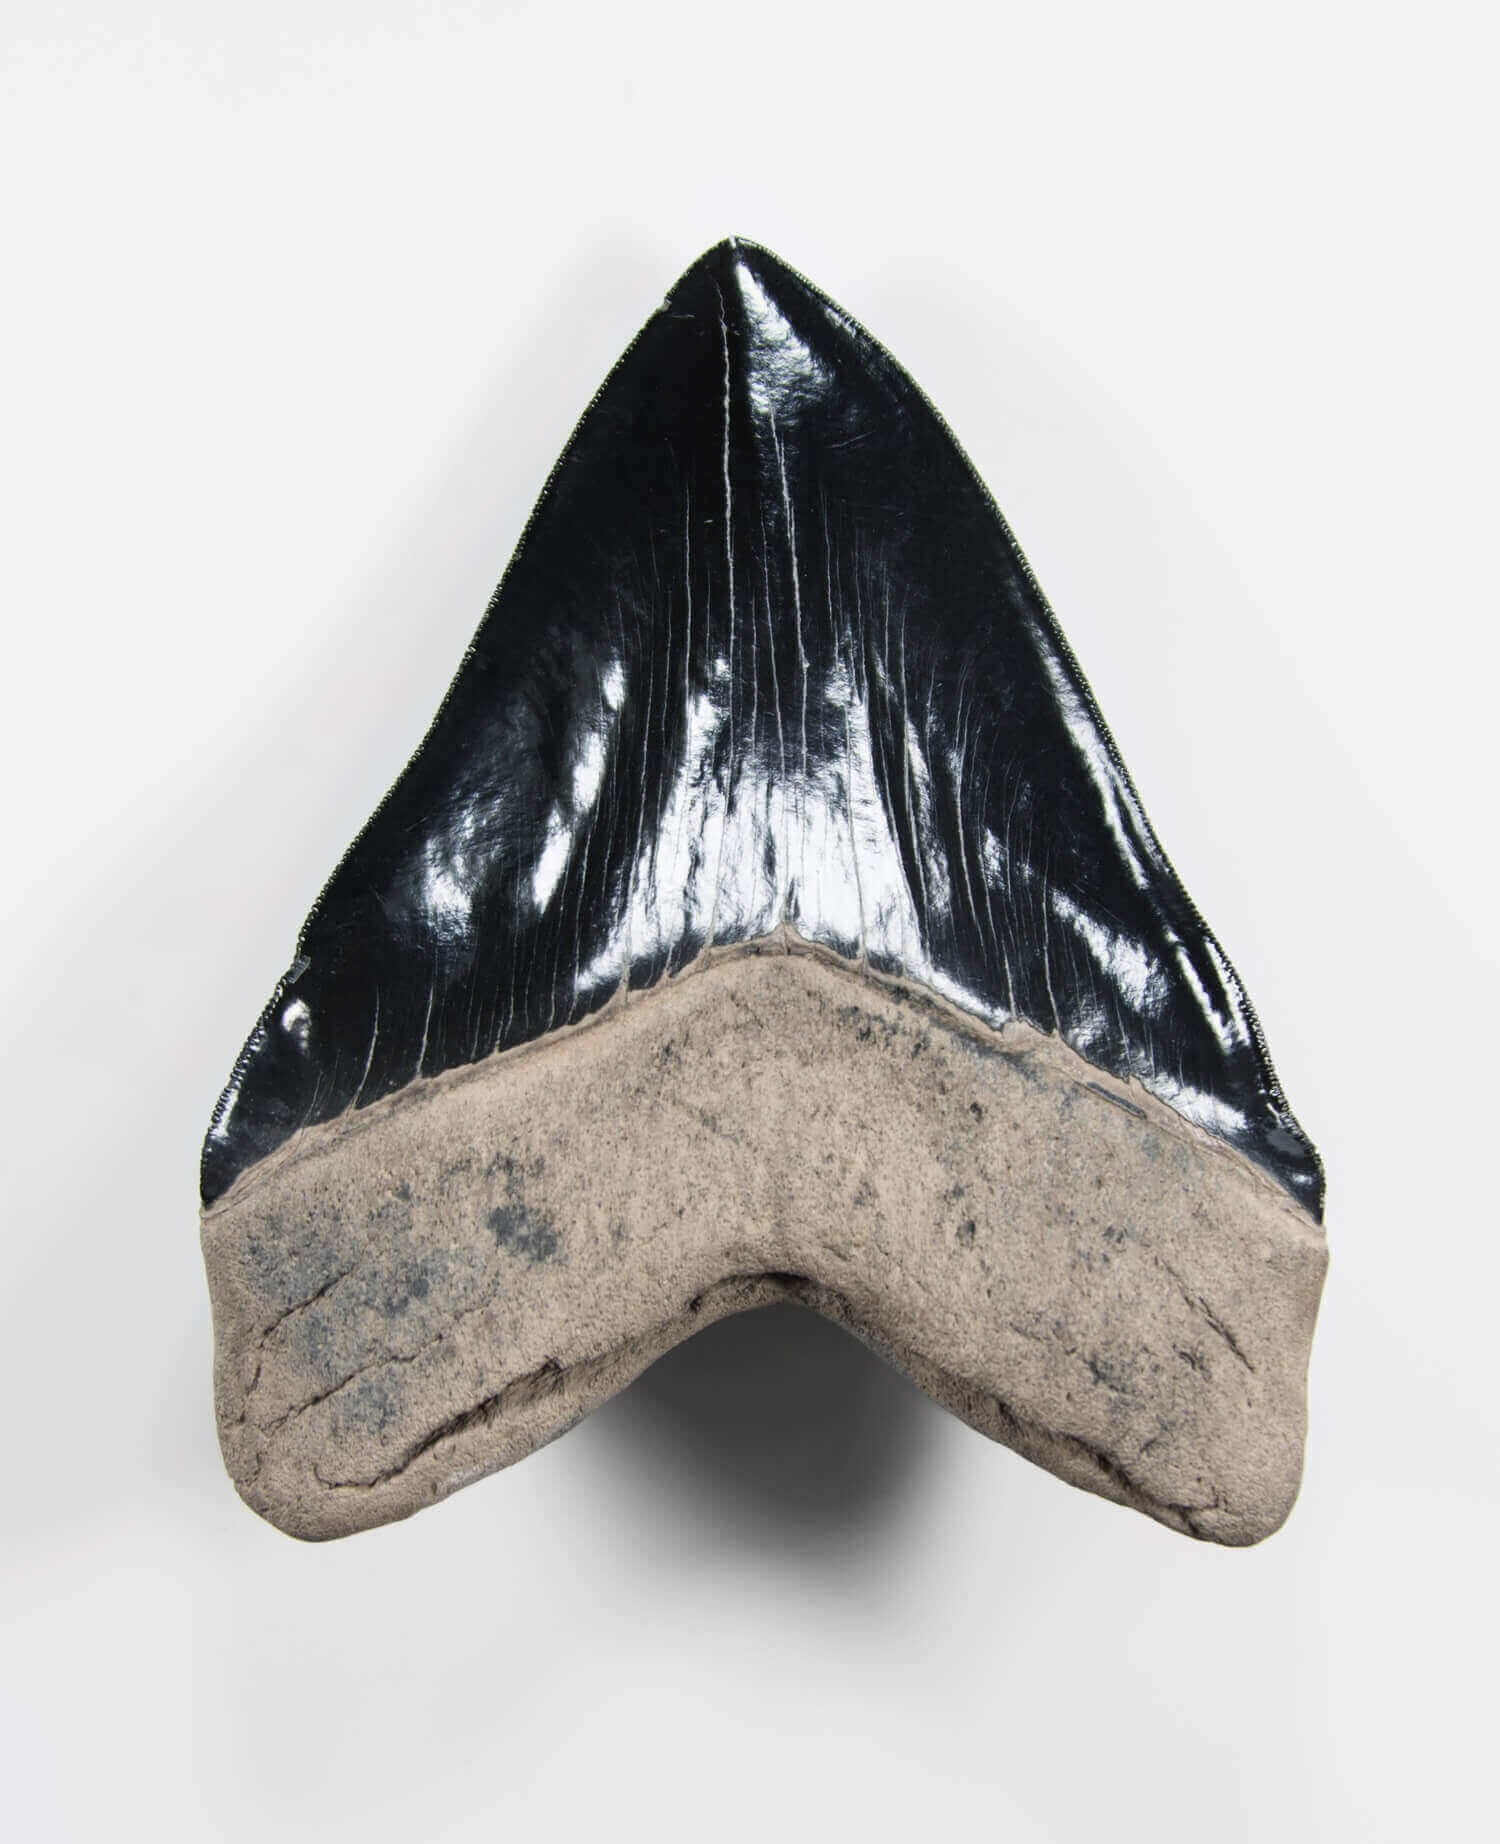 A stunning museum-standard rare fossil Megalodon carcharodon shark tooth for sale on a bronze stand measuring 6 inches